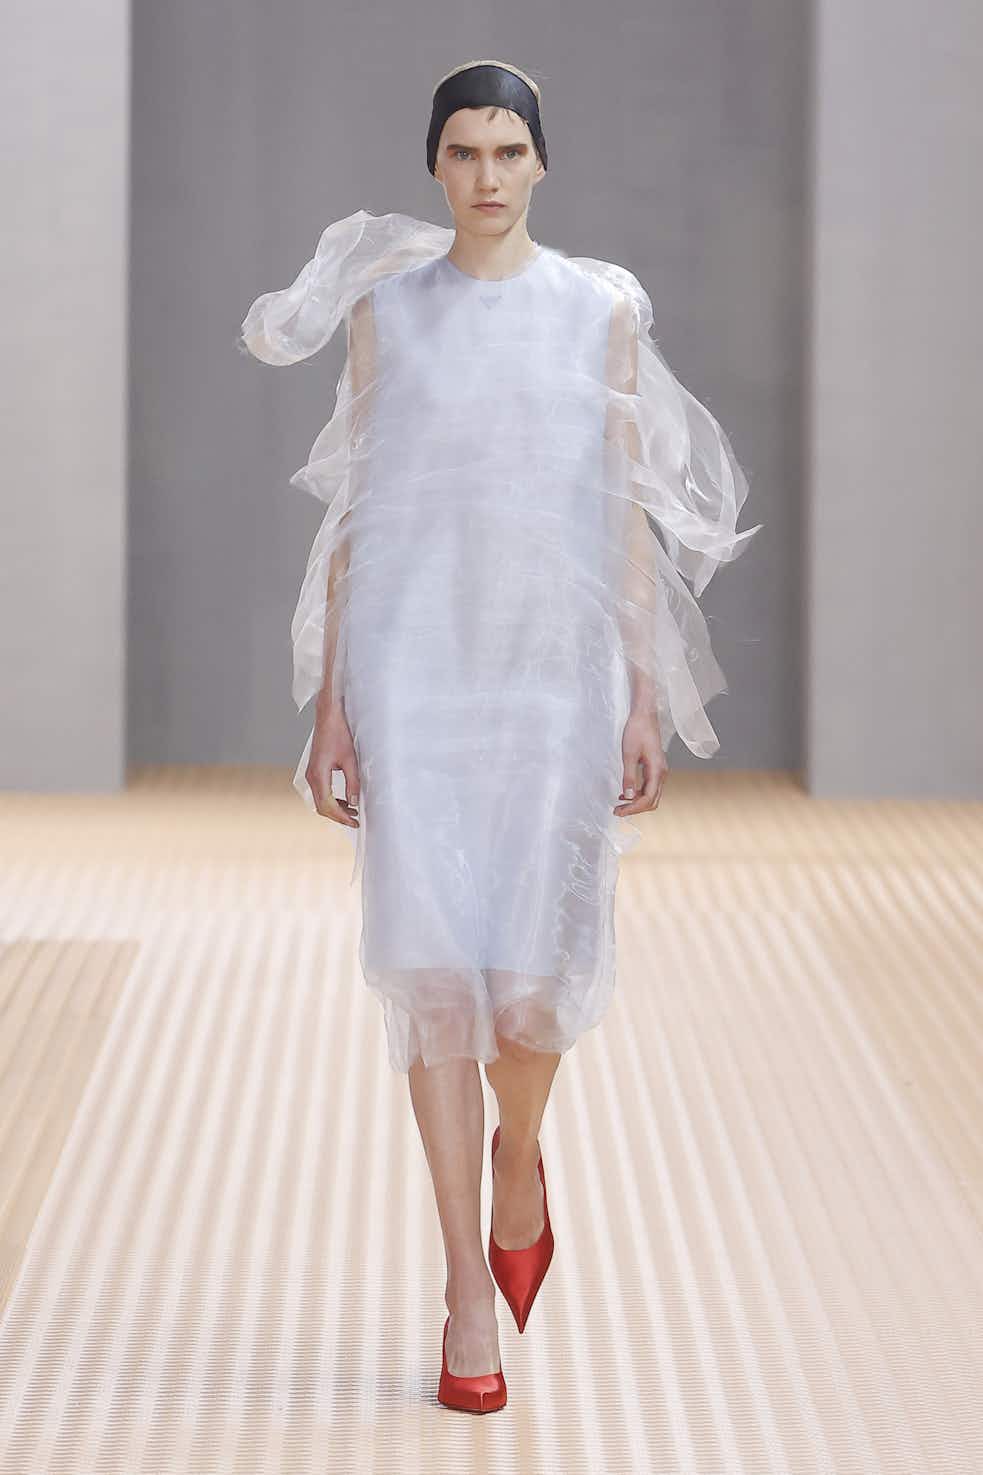 DESIGN and ART MAGAZINE: Milan Fashion Week: Highlights from the